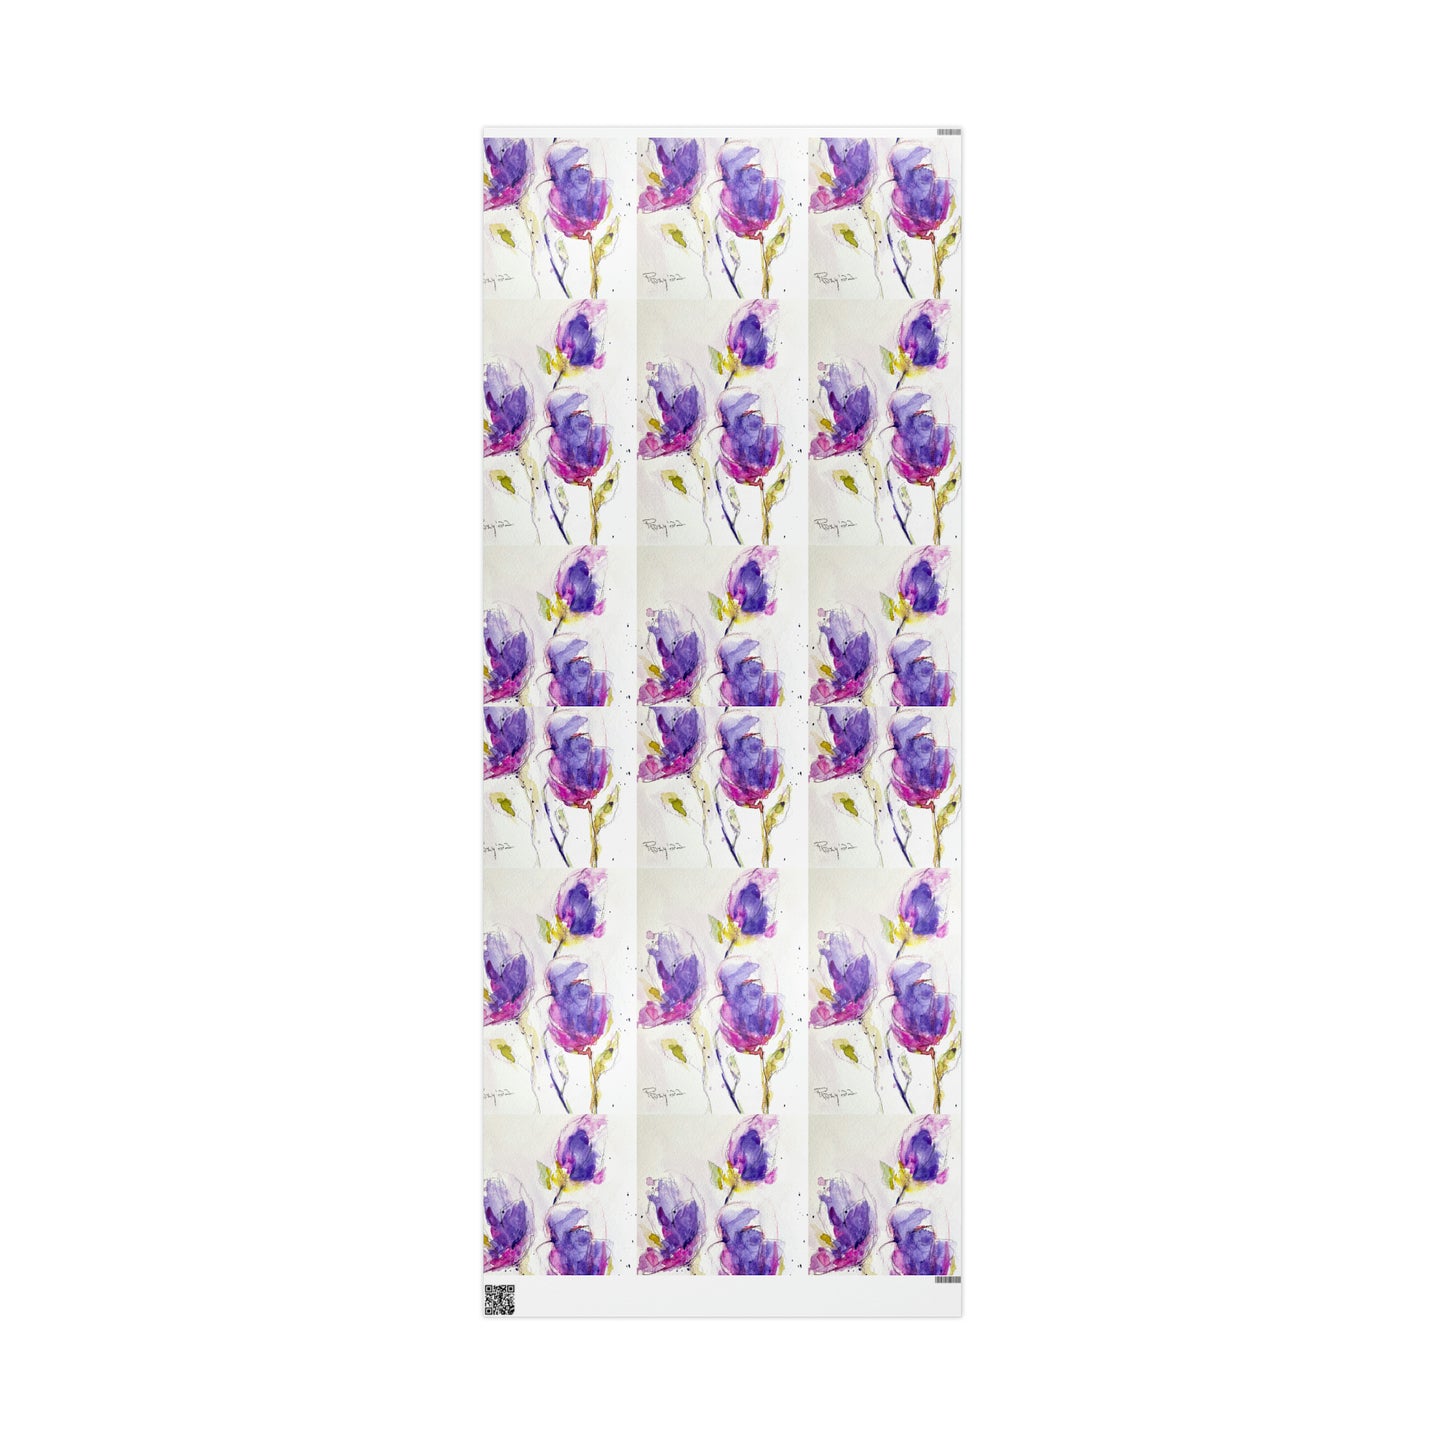 Elegant Loose Floral Watercolor Purple Flowers (3 Sizes) Wrapping Papers